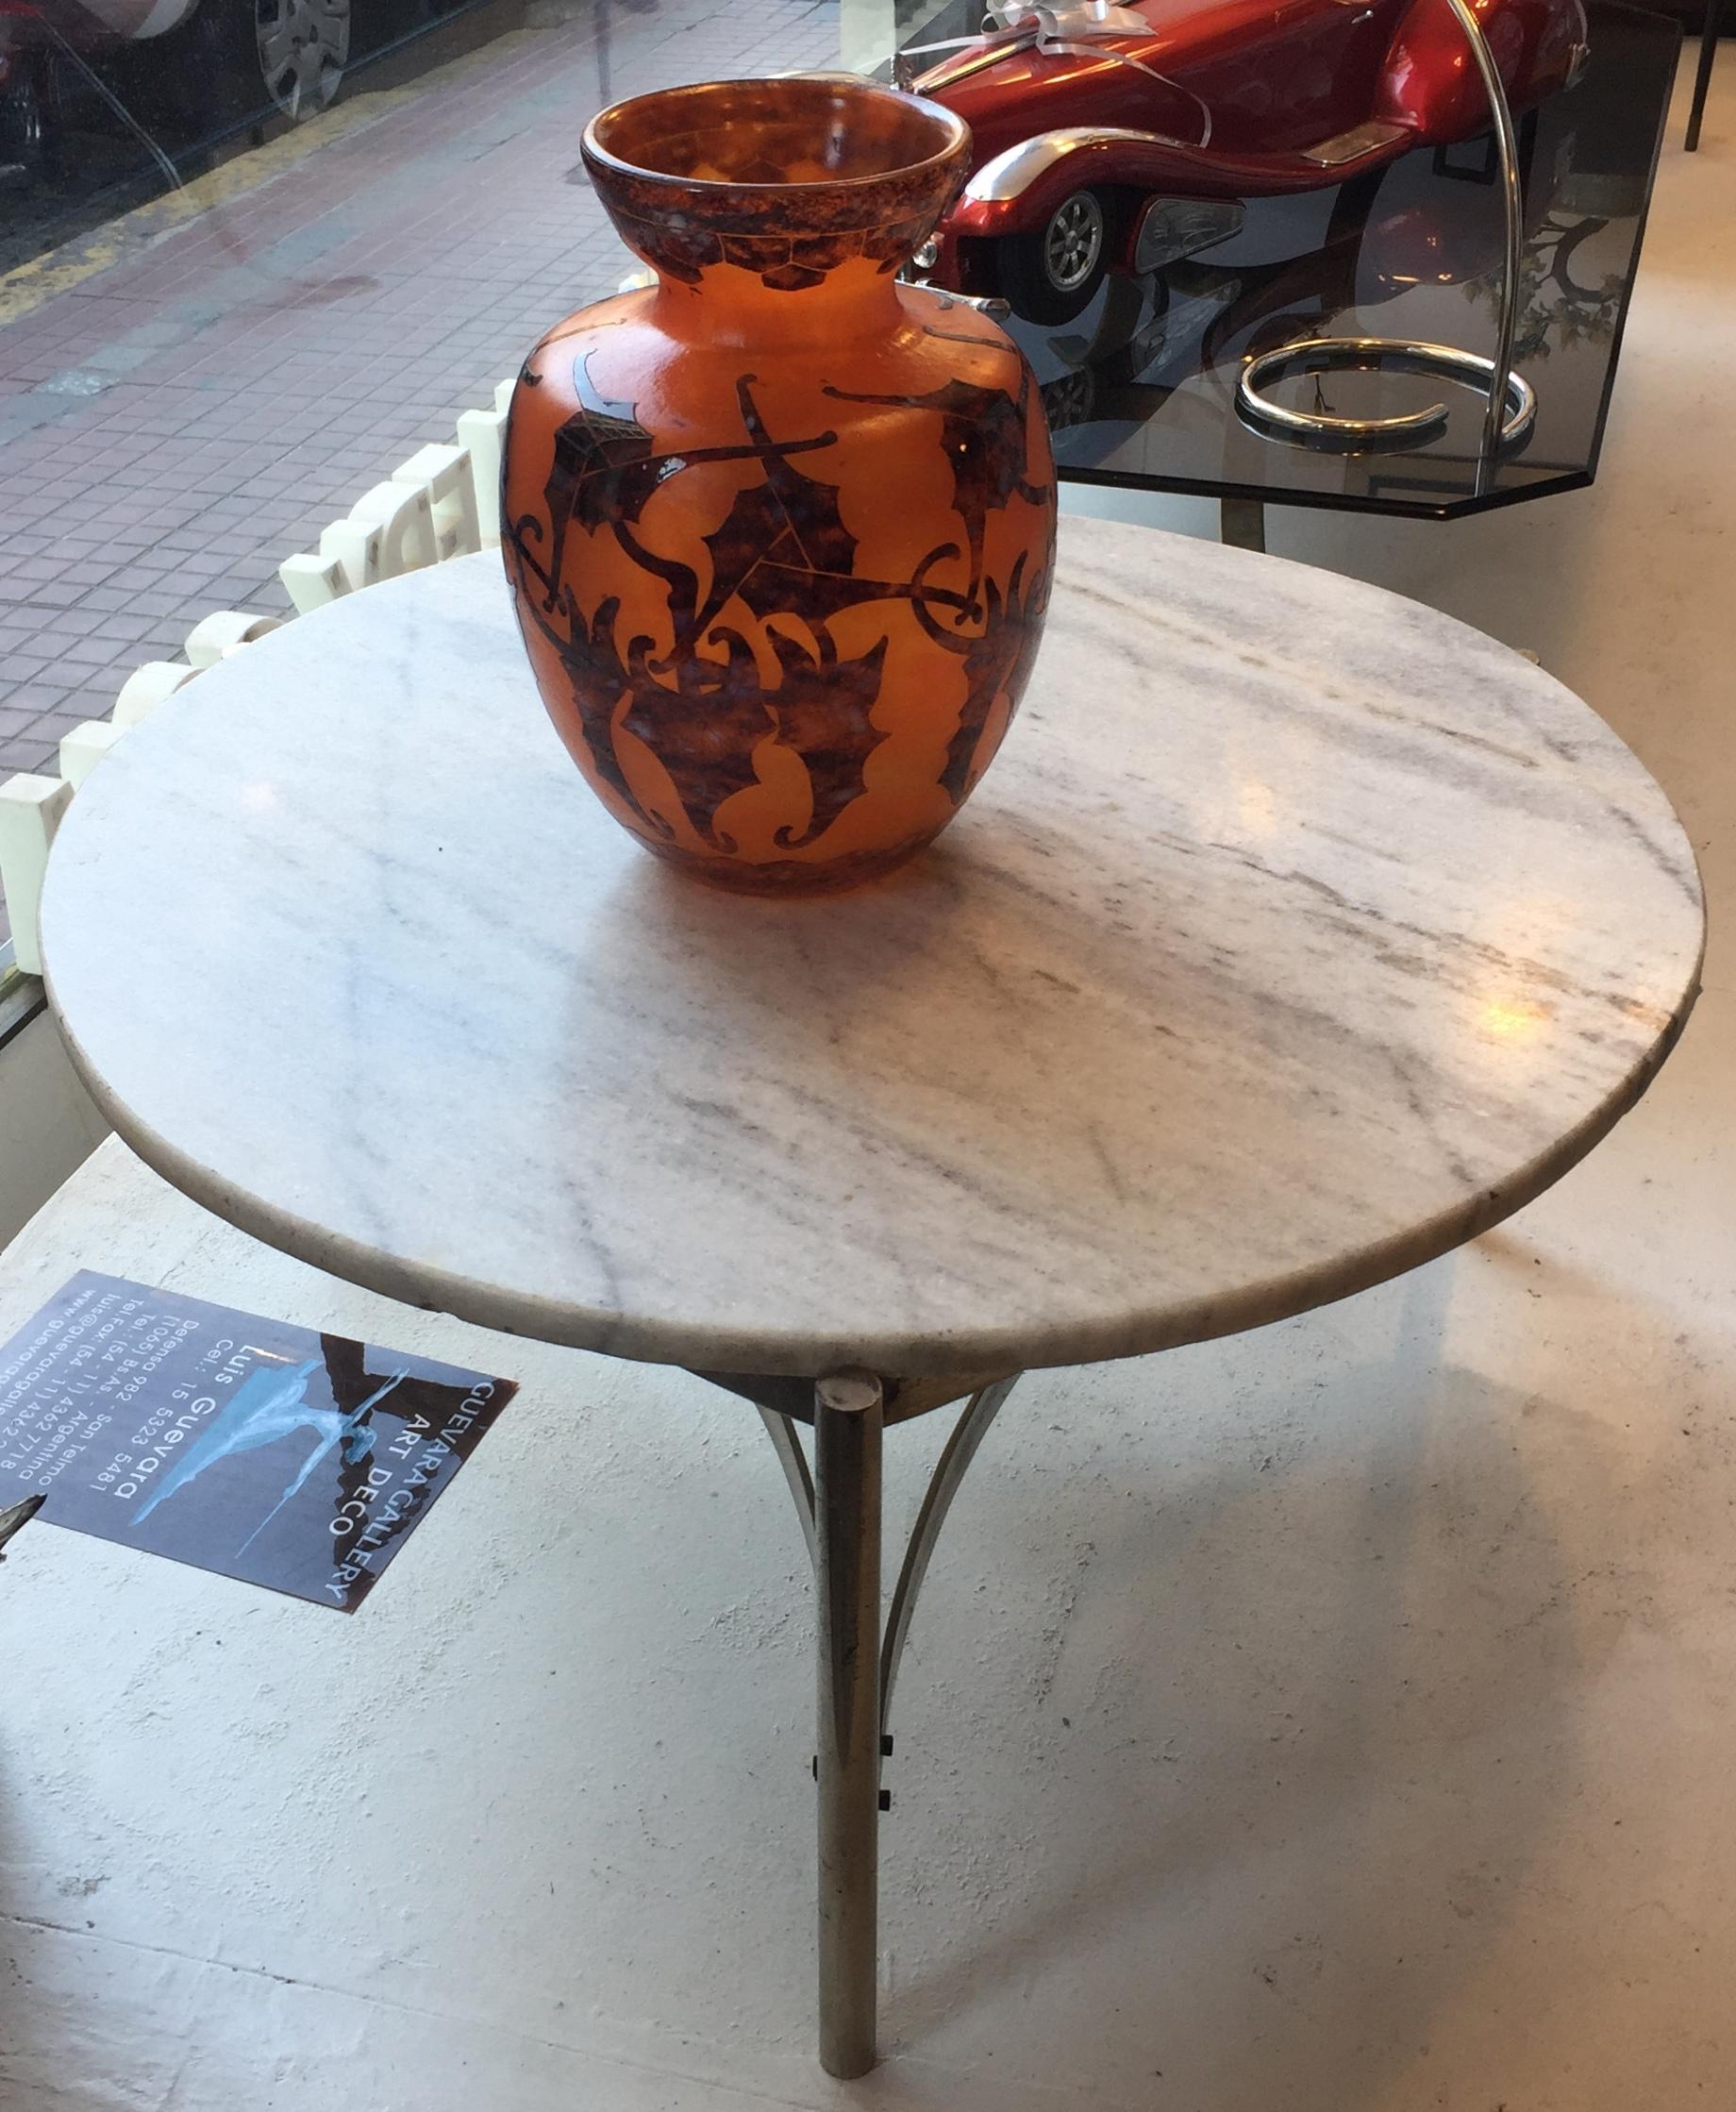 Coffe table

Material: marble and chrome
France.
We have specialized in the sale of Art Deco and Art Nouveau styles since 1982.If you have any questions we are at your disposal.
Pushing the button that reads 'View All From Seller'. And you can see